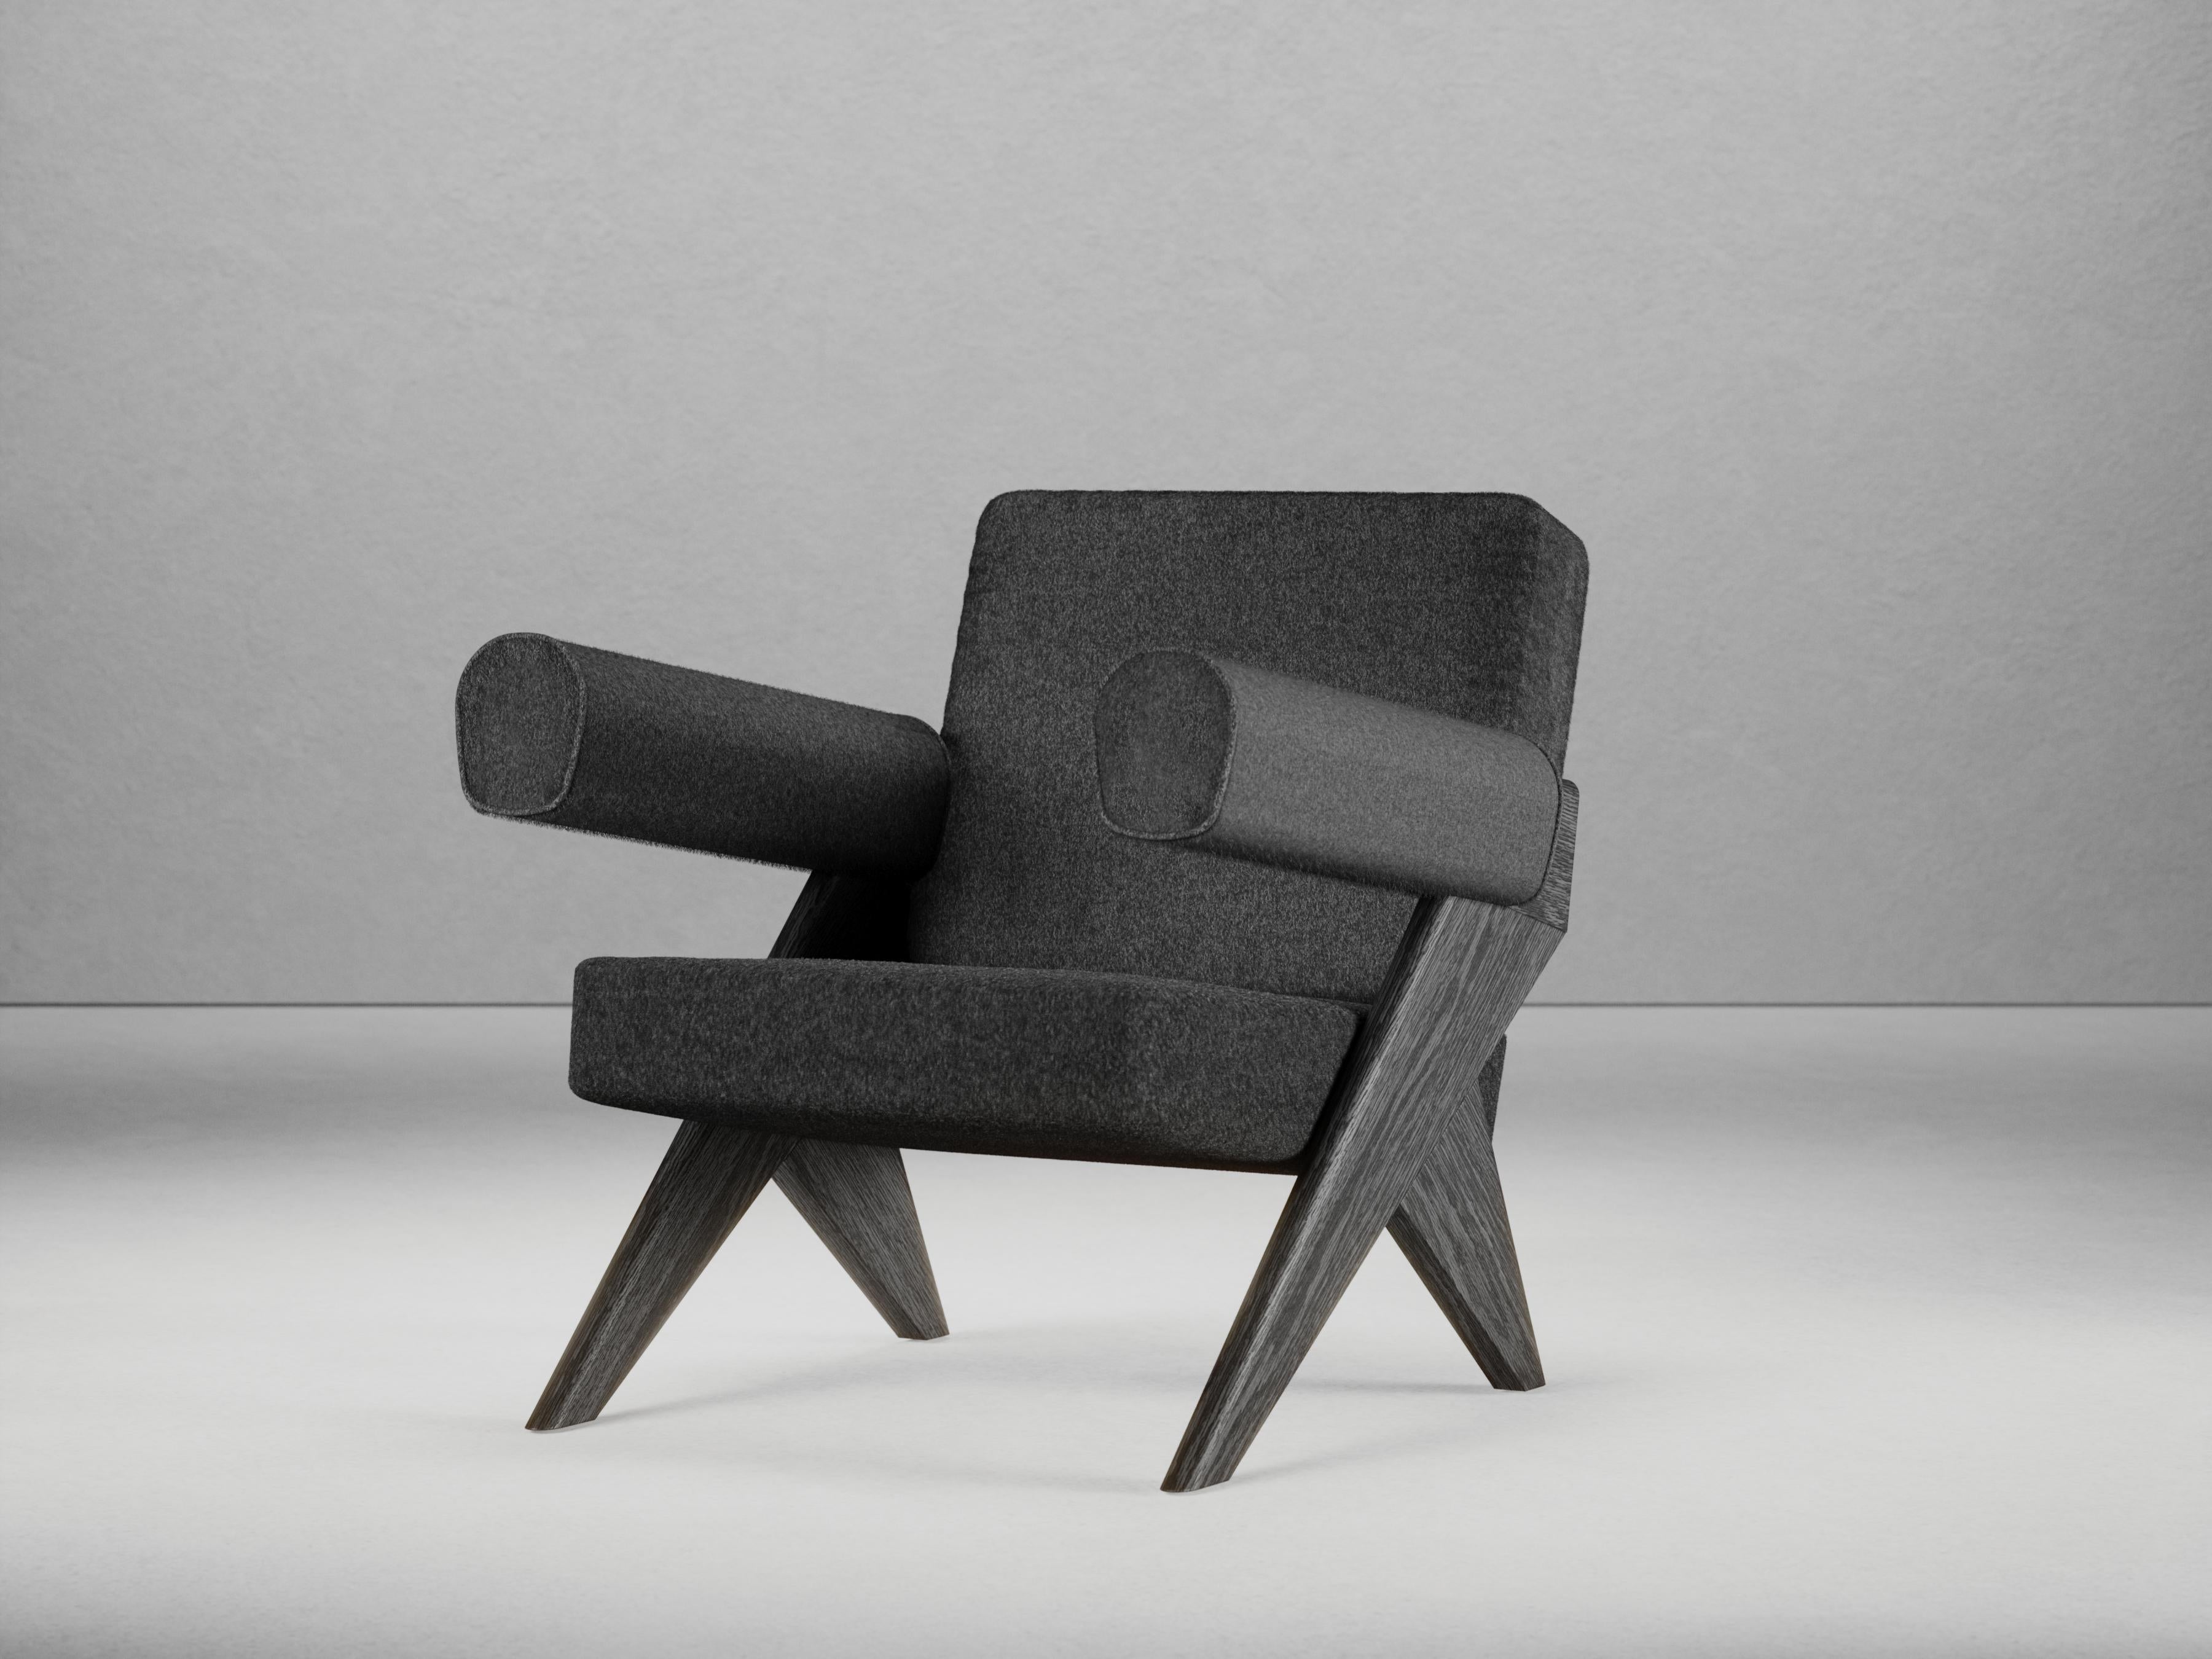 Loro Piana Wool Souvenir Armchair by Gio Pagani
Dimensions: D 77 x W 69 x H 75 cm. SH: 38 cm.
Materials: Black elm wood and Loro Piana wool.

In a fluid society capable of mixing infinite social and cultural varieties, the nostalgic search for